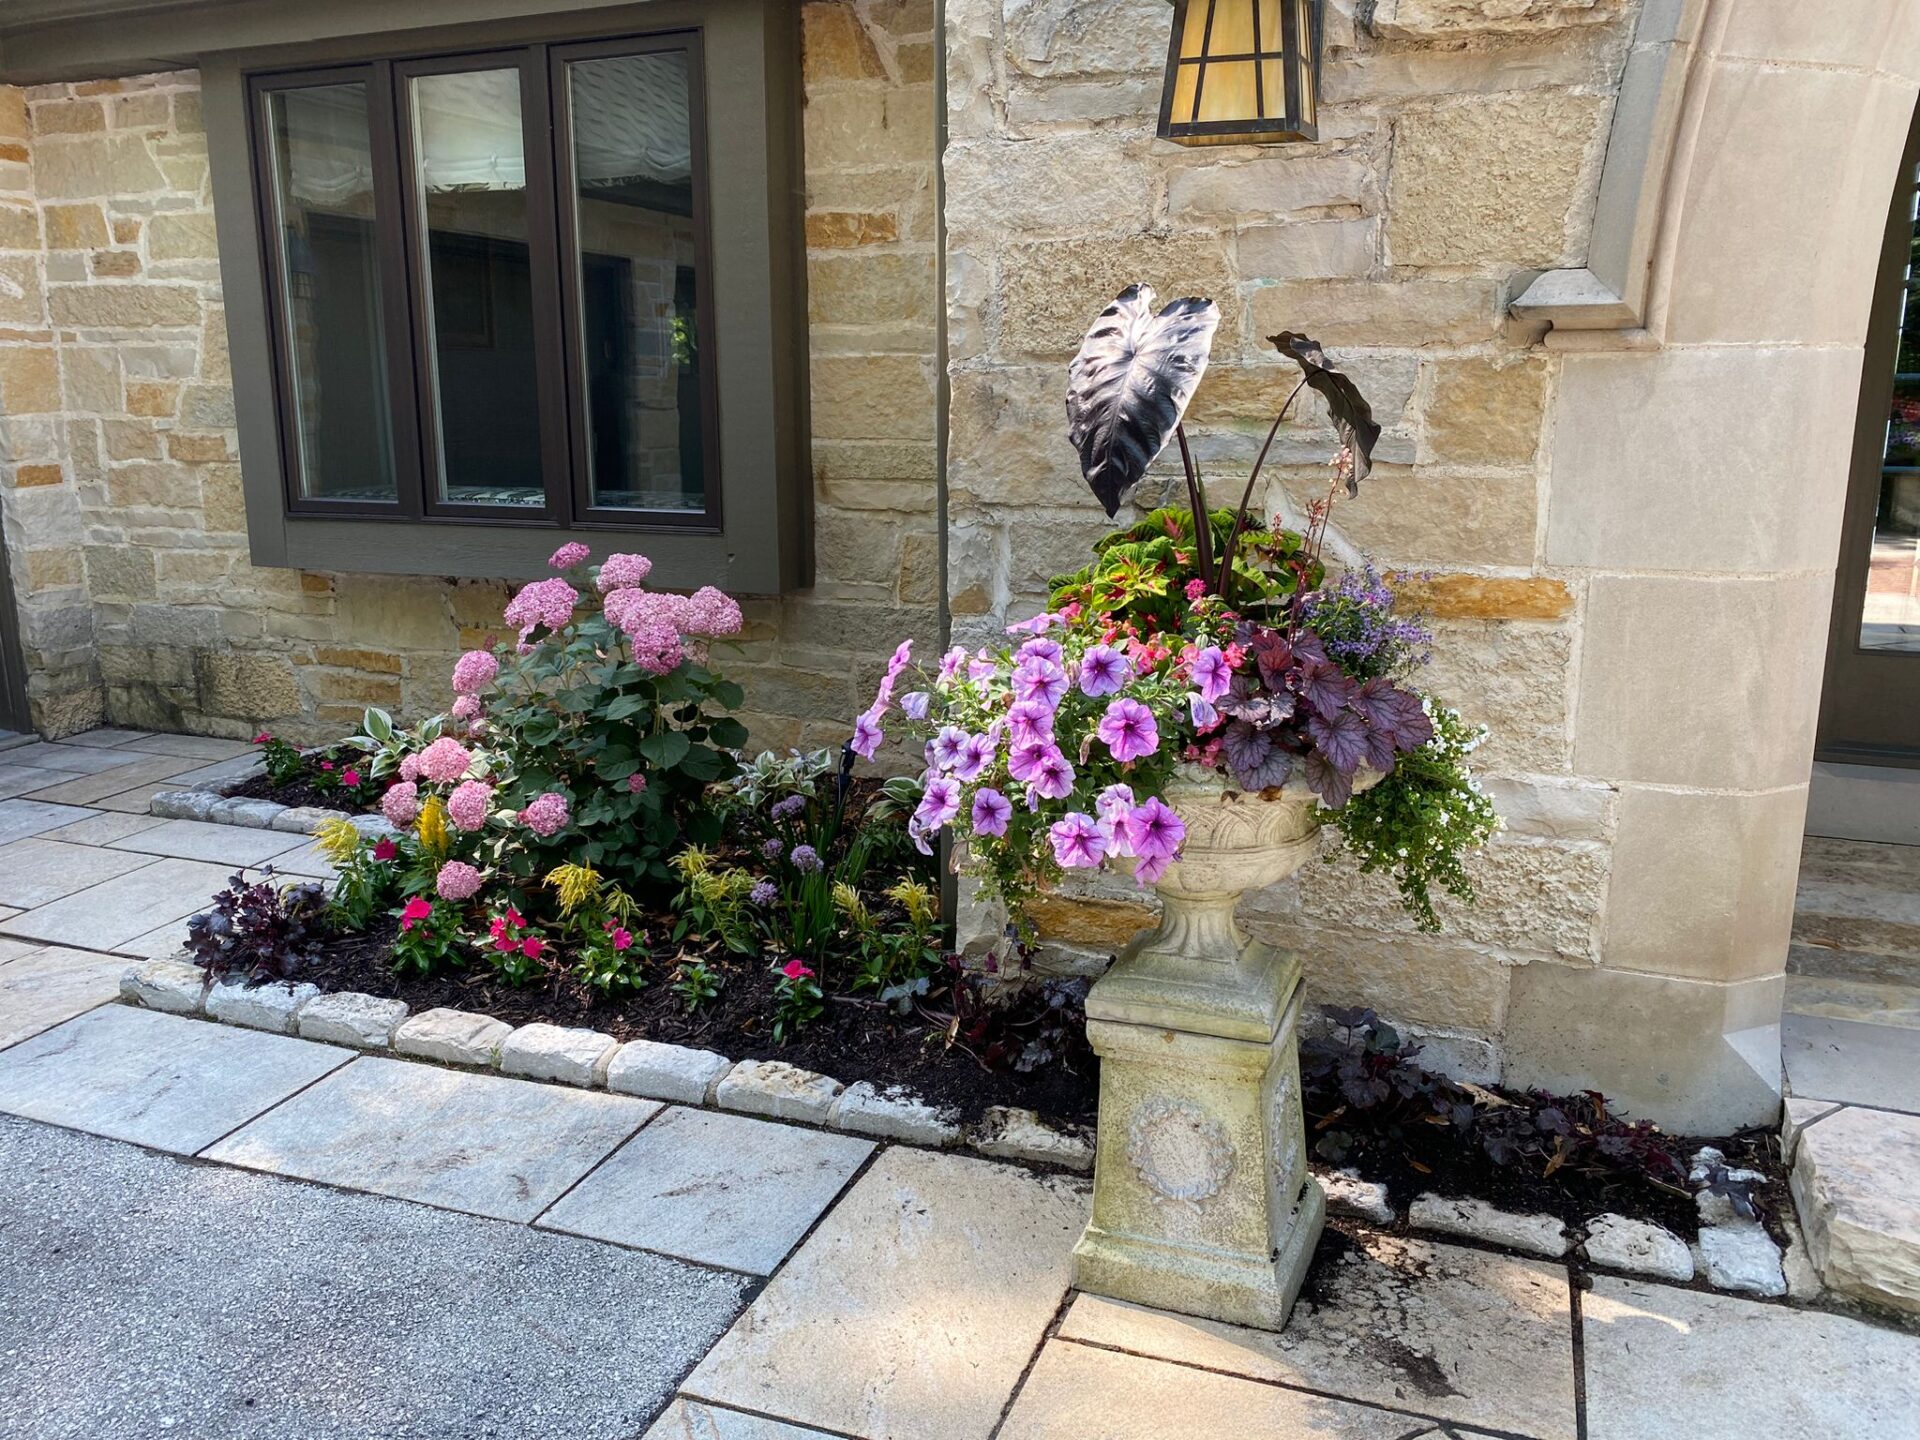 A stone house with a flower bed containing hydrangeas and assorted plants, next to a window and an outdoor lamp, on a paved surface.